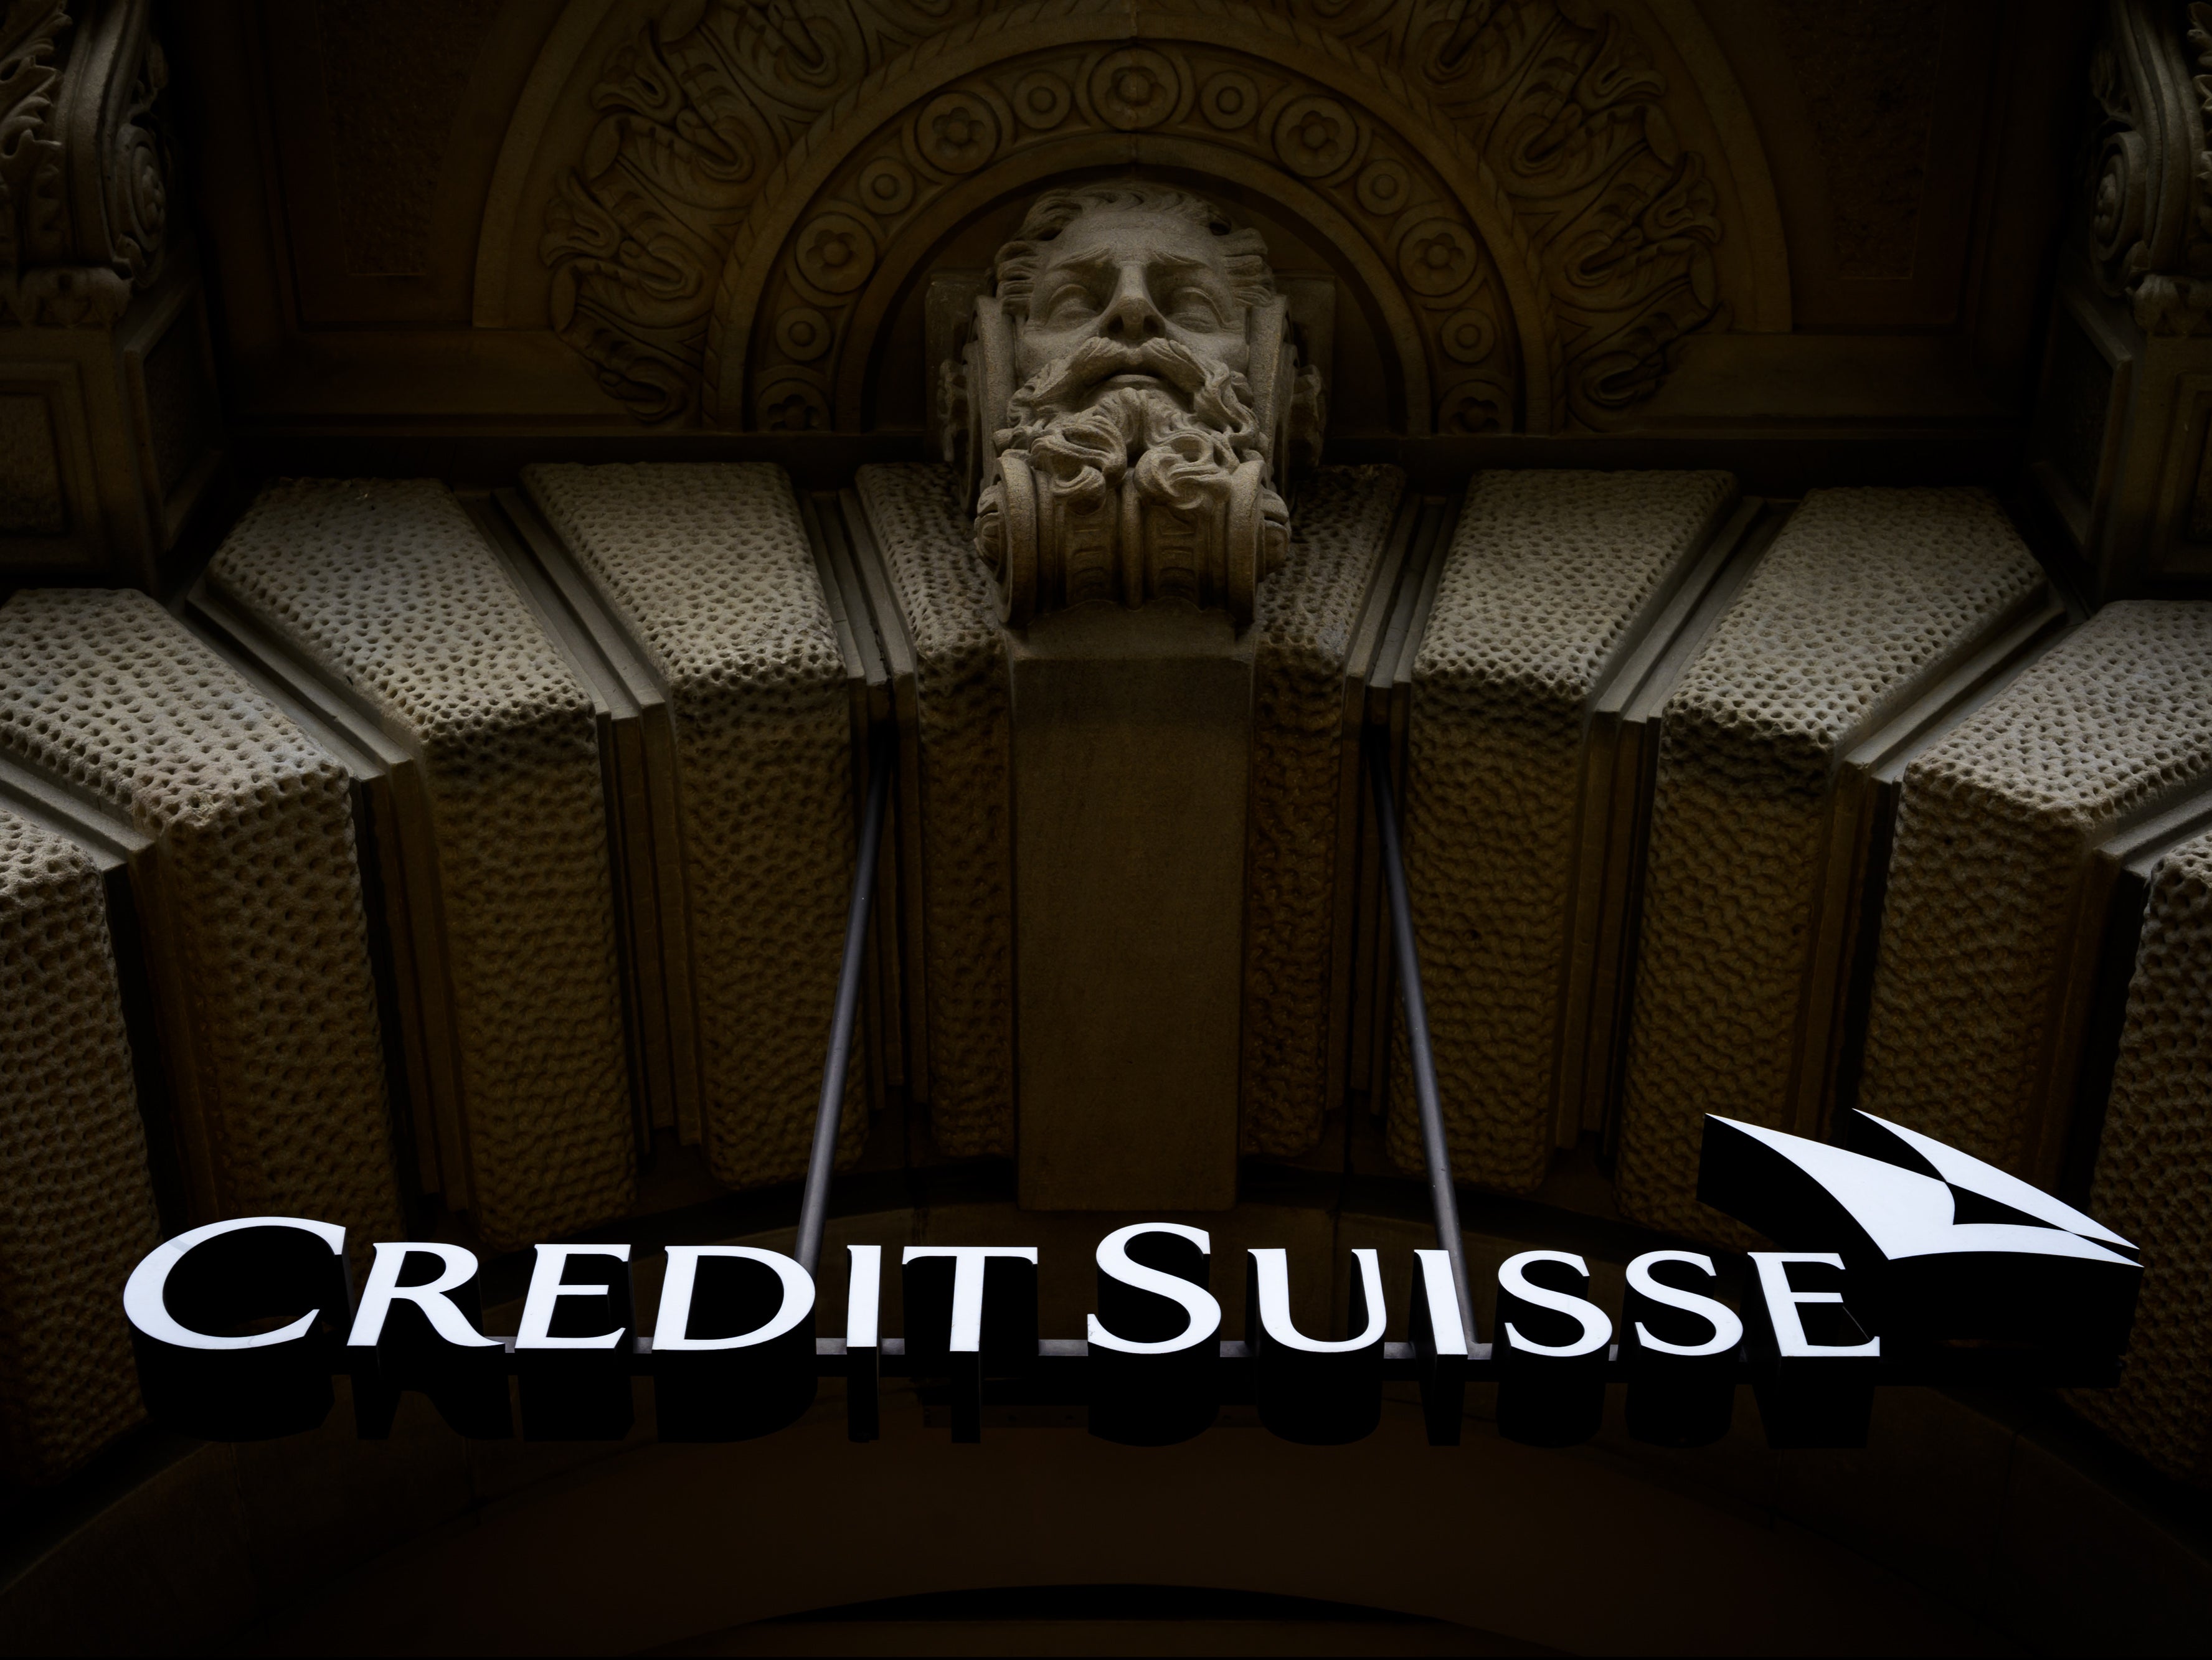 Swiss banking giant Credit Suisse’s headquarters in Zurich